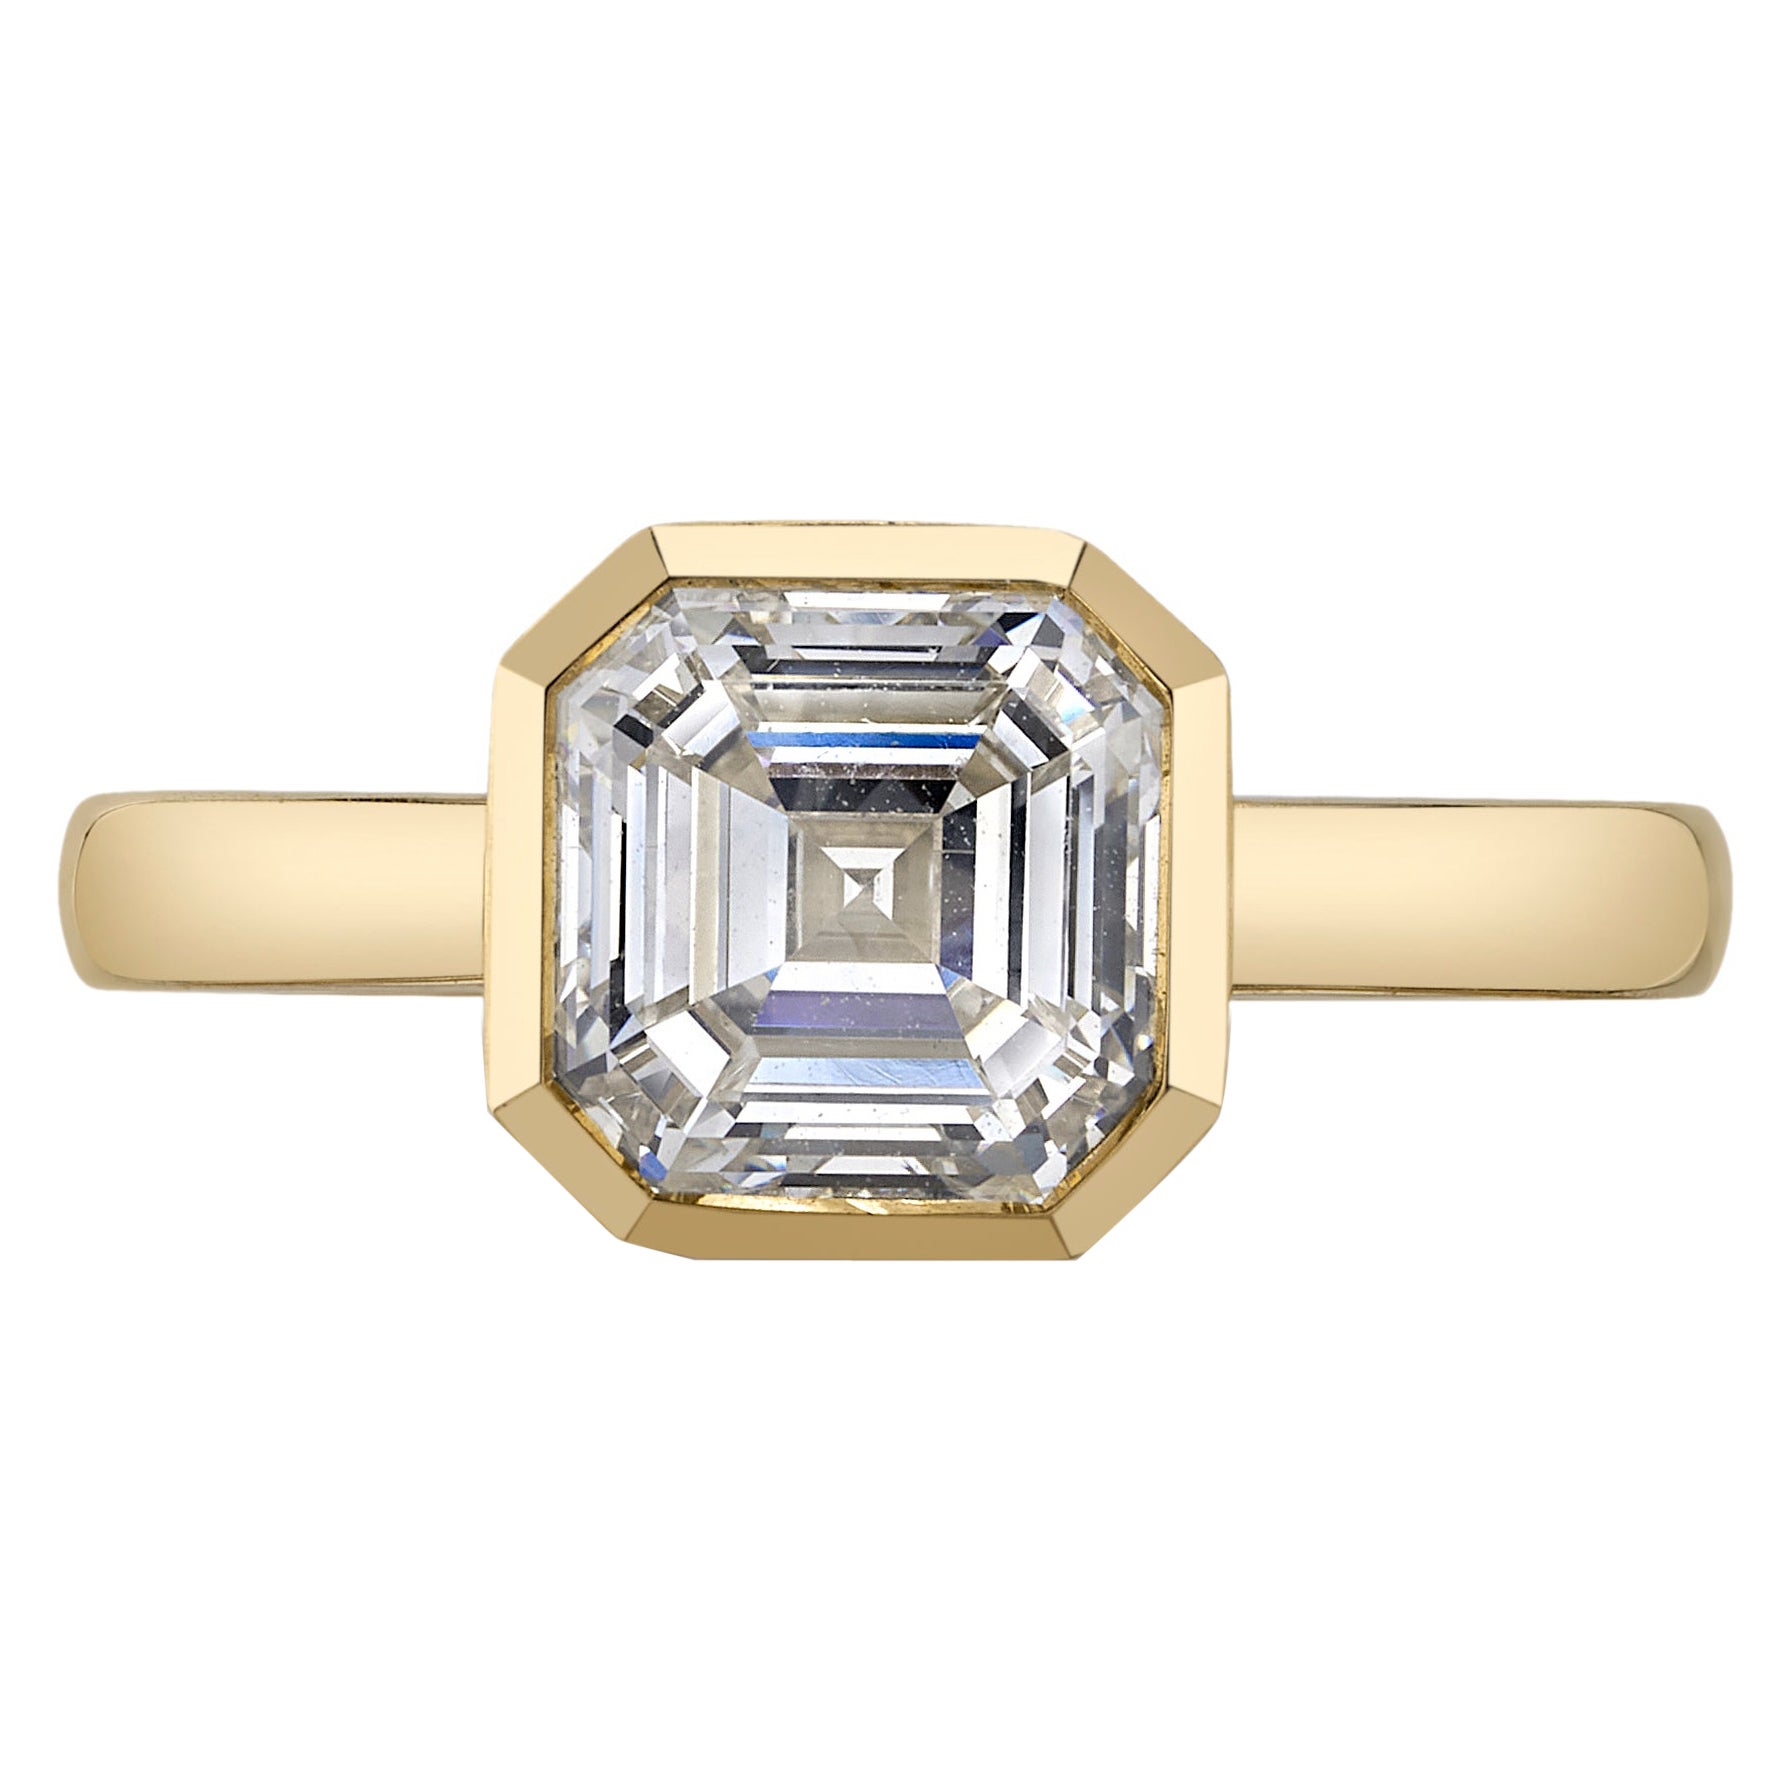 Handcrafted Wyler Asscher Cut Diamond Ring by Single Stone